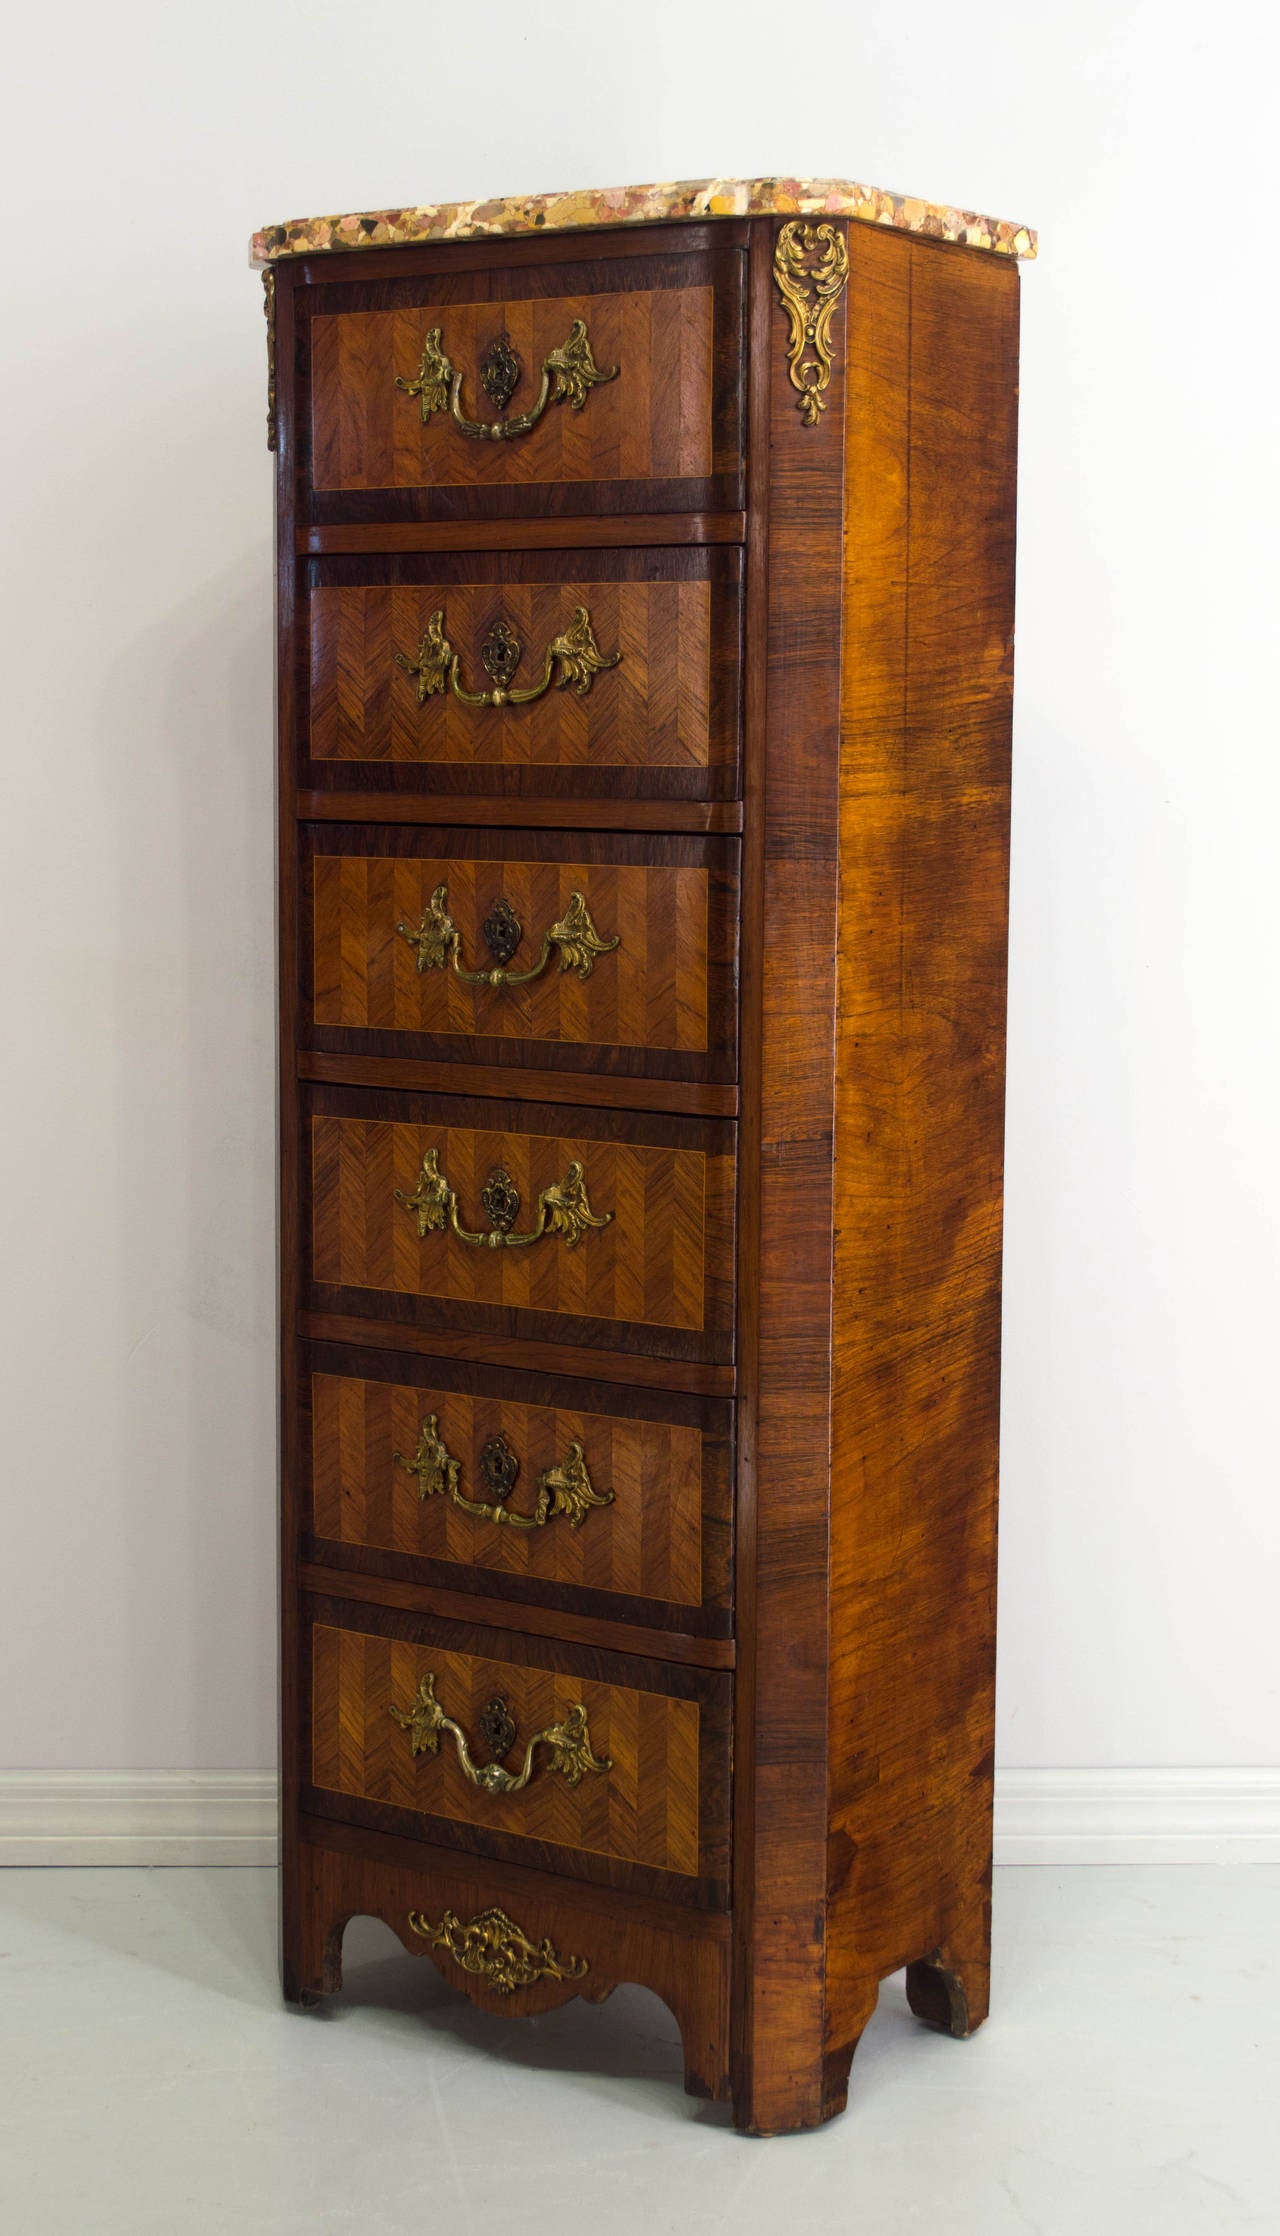 A tall chest with six dovetailed drawers, inlaid with of veneers of mahogany, walnut and rosewood. Bronze hardware. Note: The top and bottom drawer pulls do not match the others. Locks are present, but there are not keys. Marble top. French polish